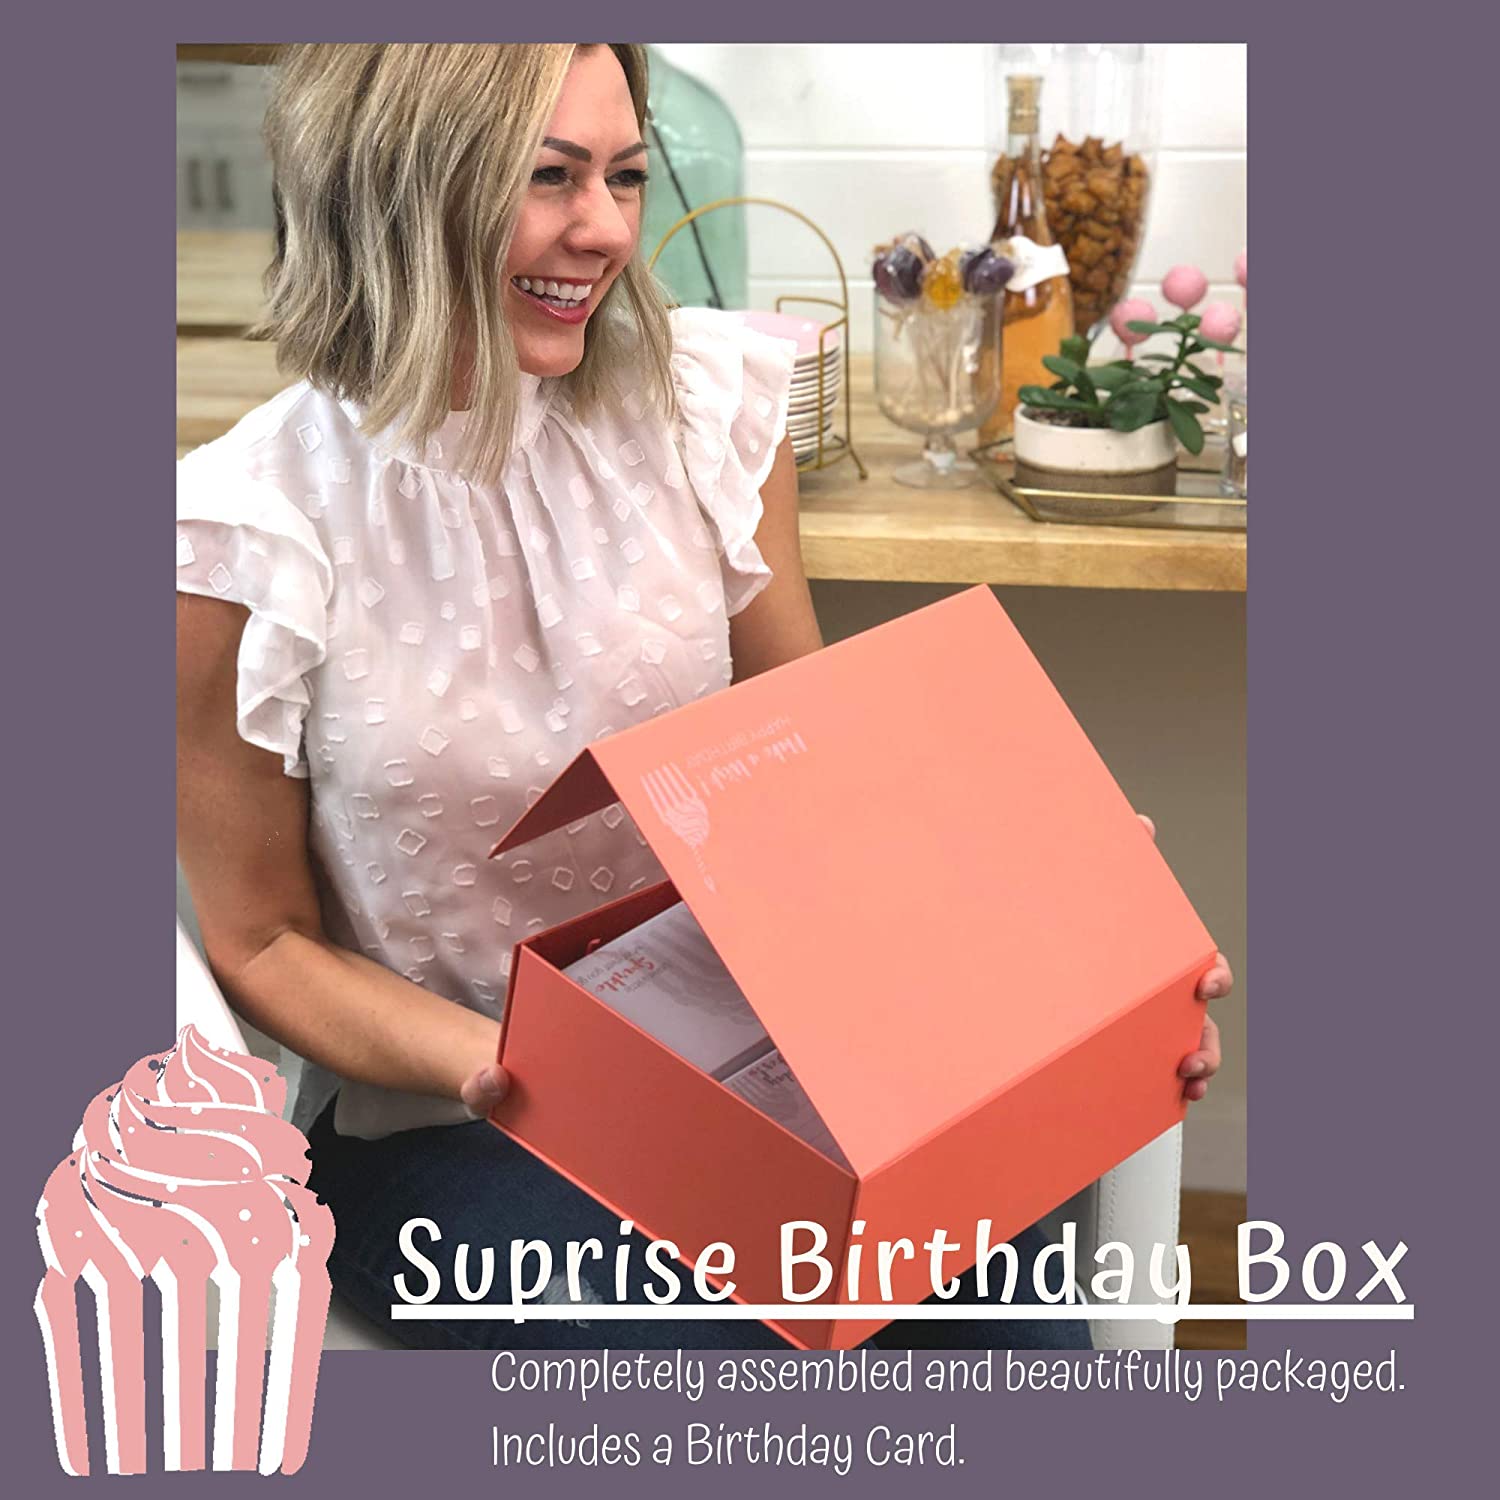 Happy Birthday Box for Women  5 Premium Special & Unique Gifts - Like Want  Have